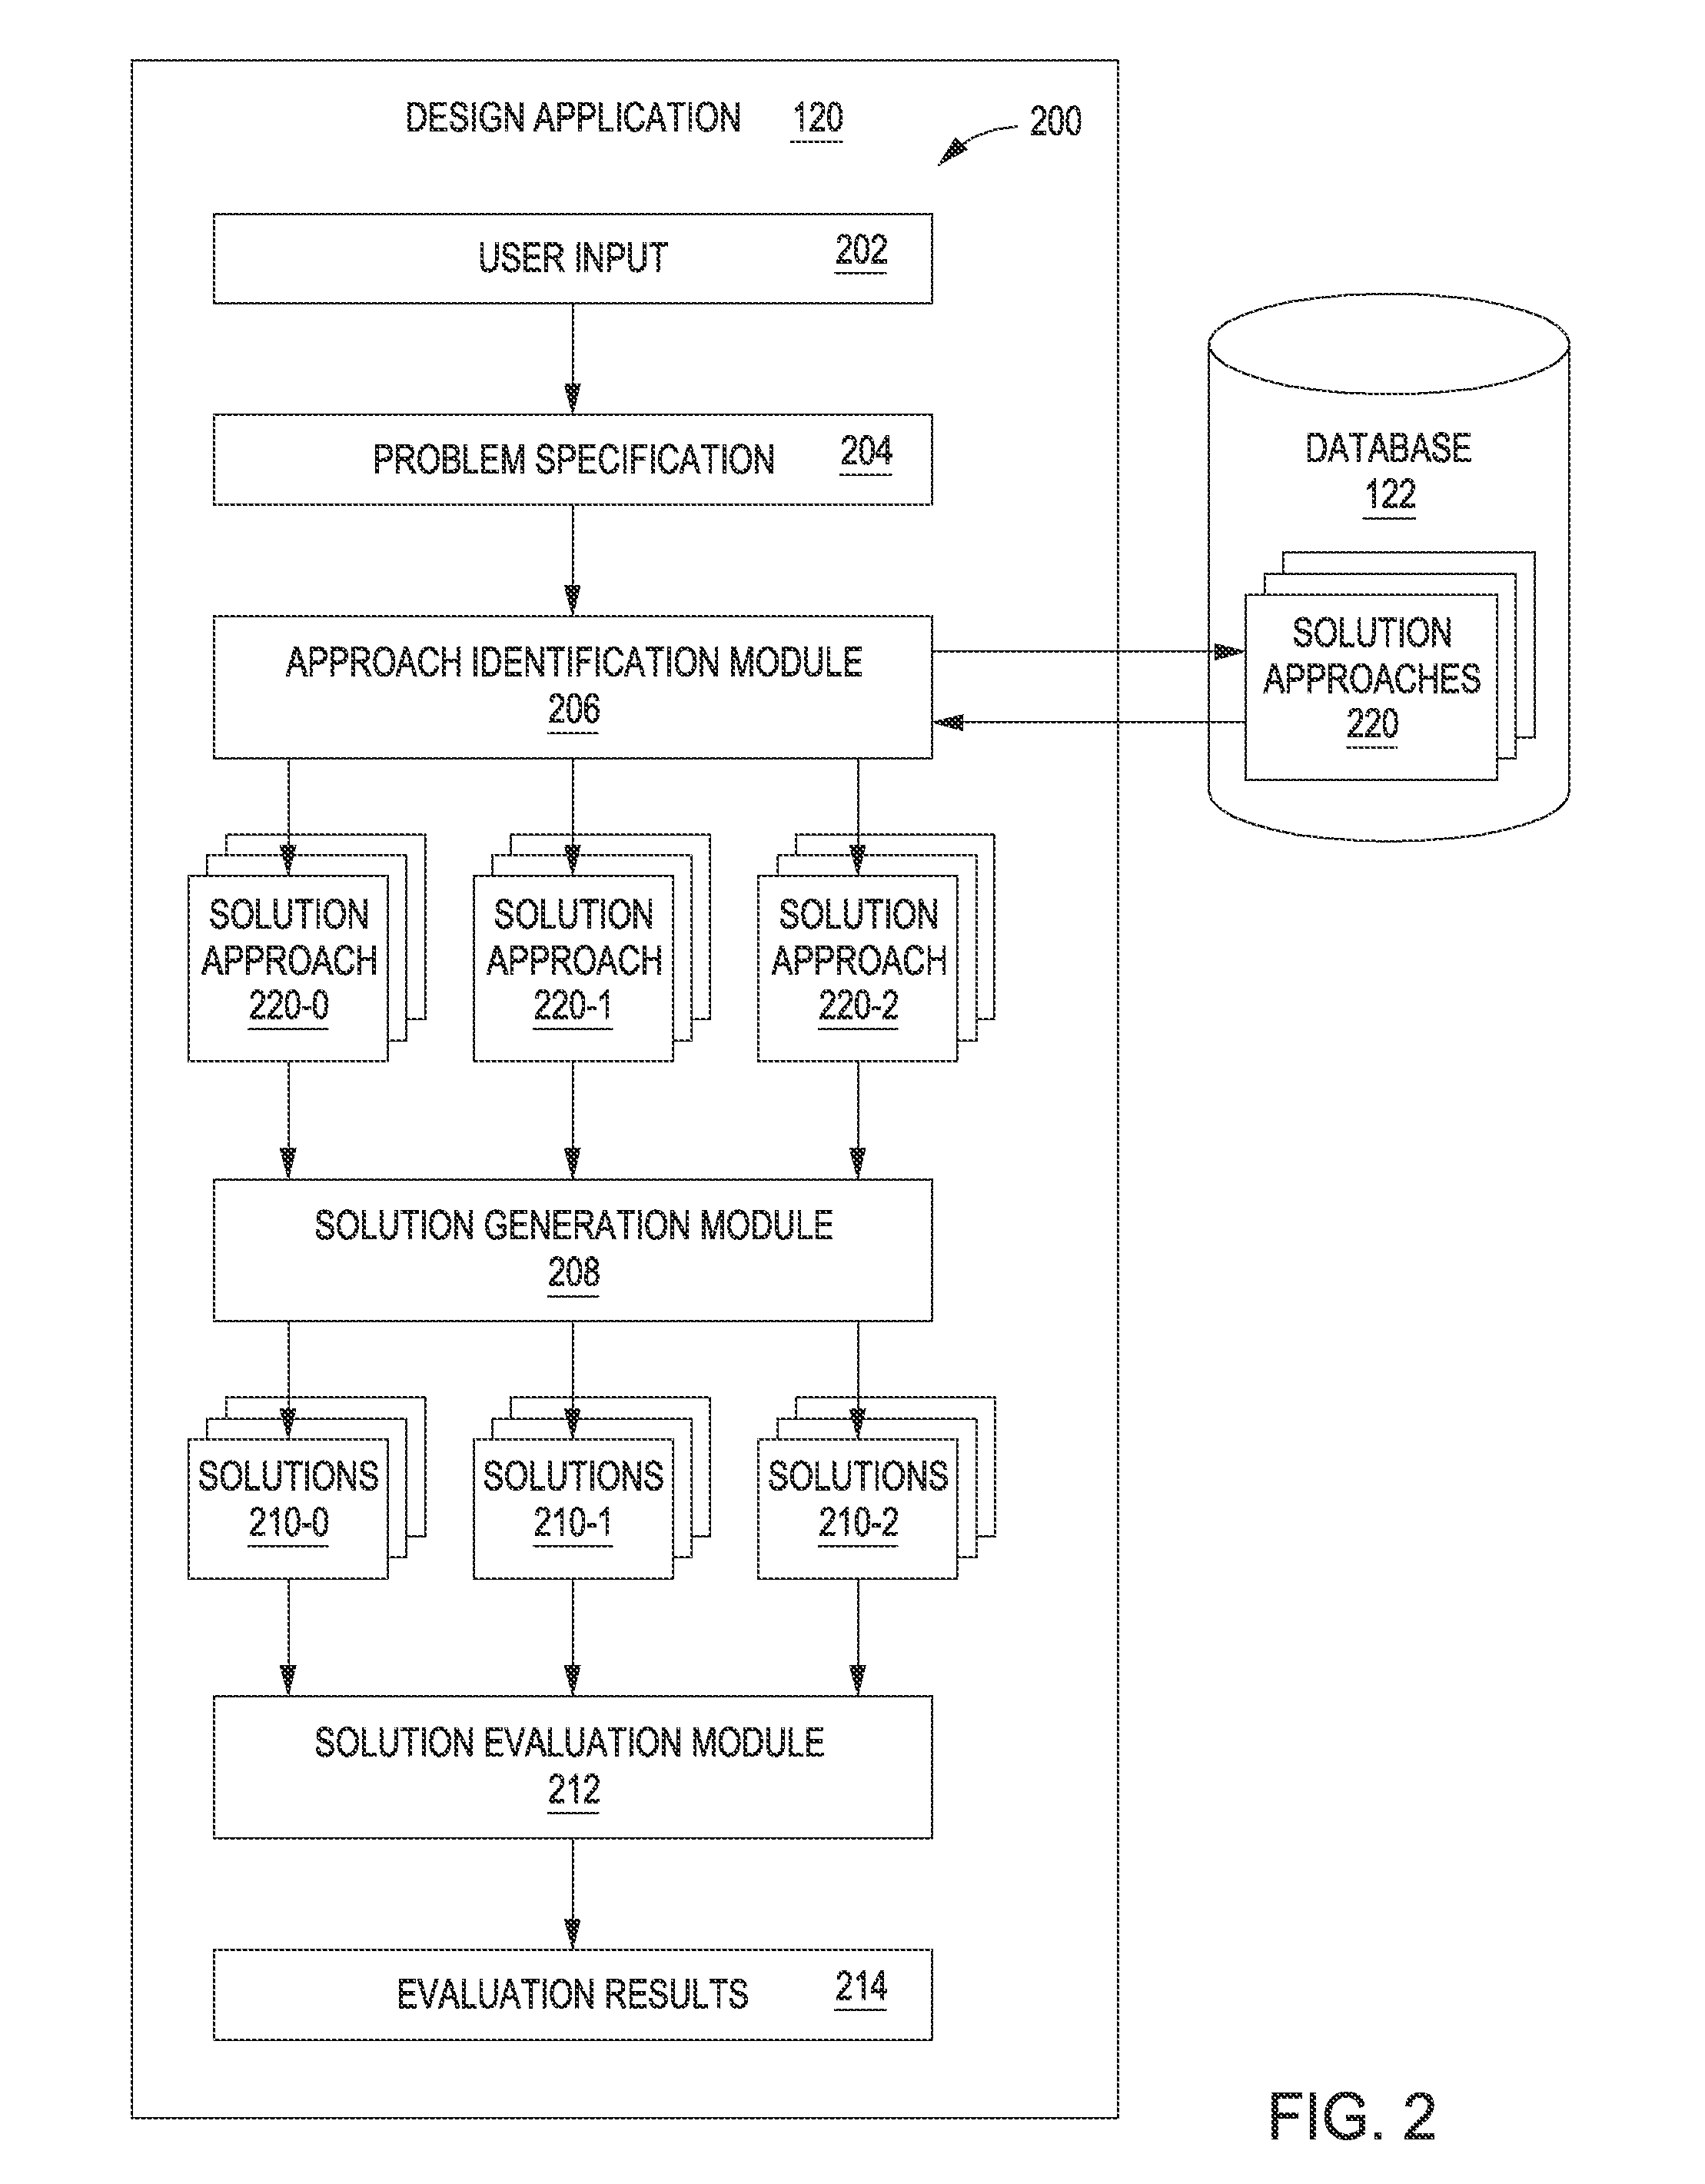 Technique for generating a spectrum of feasible design solutions